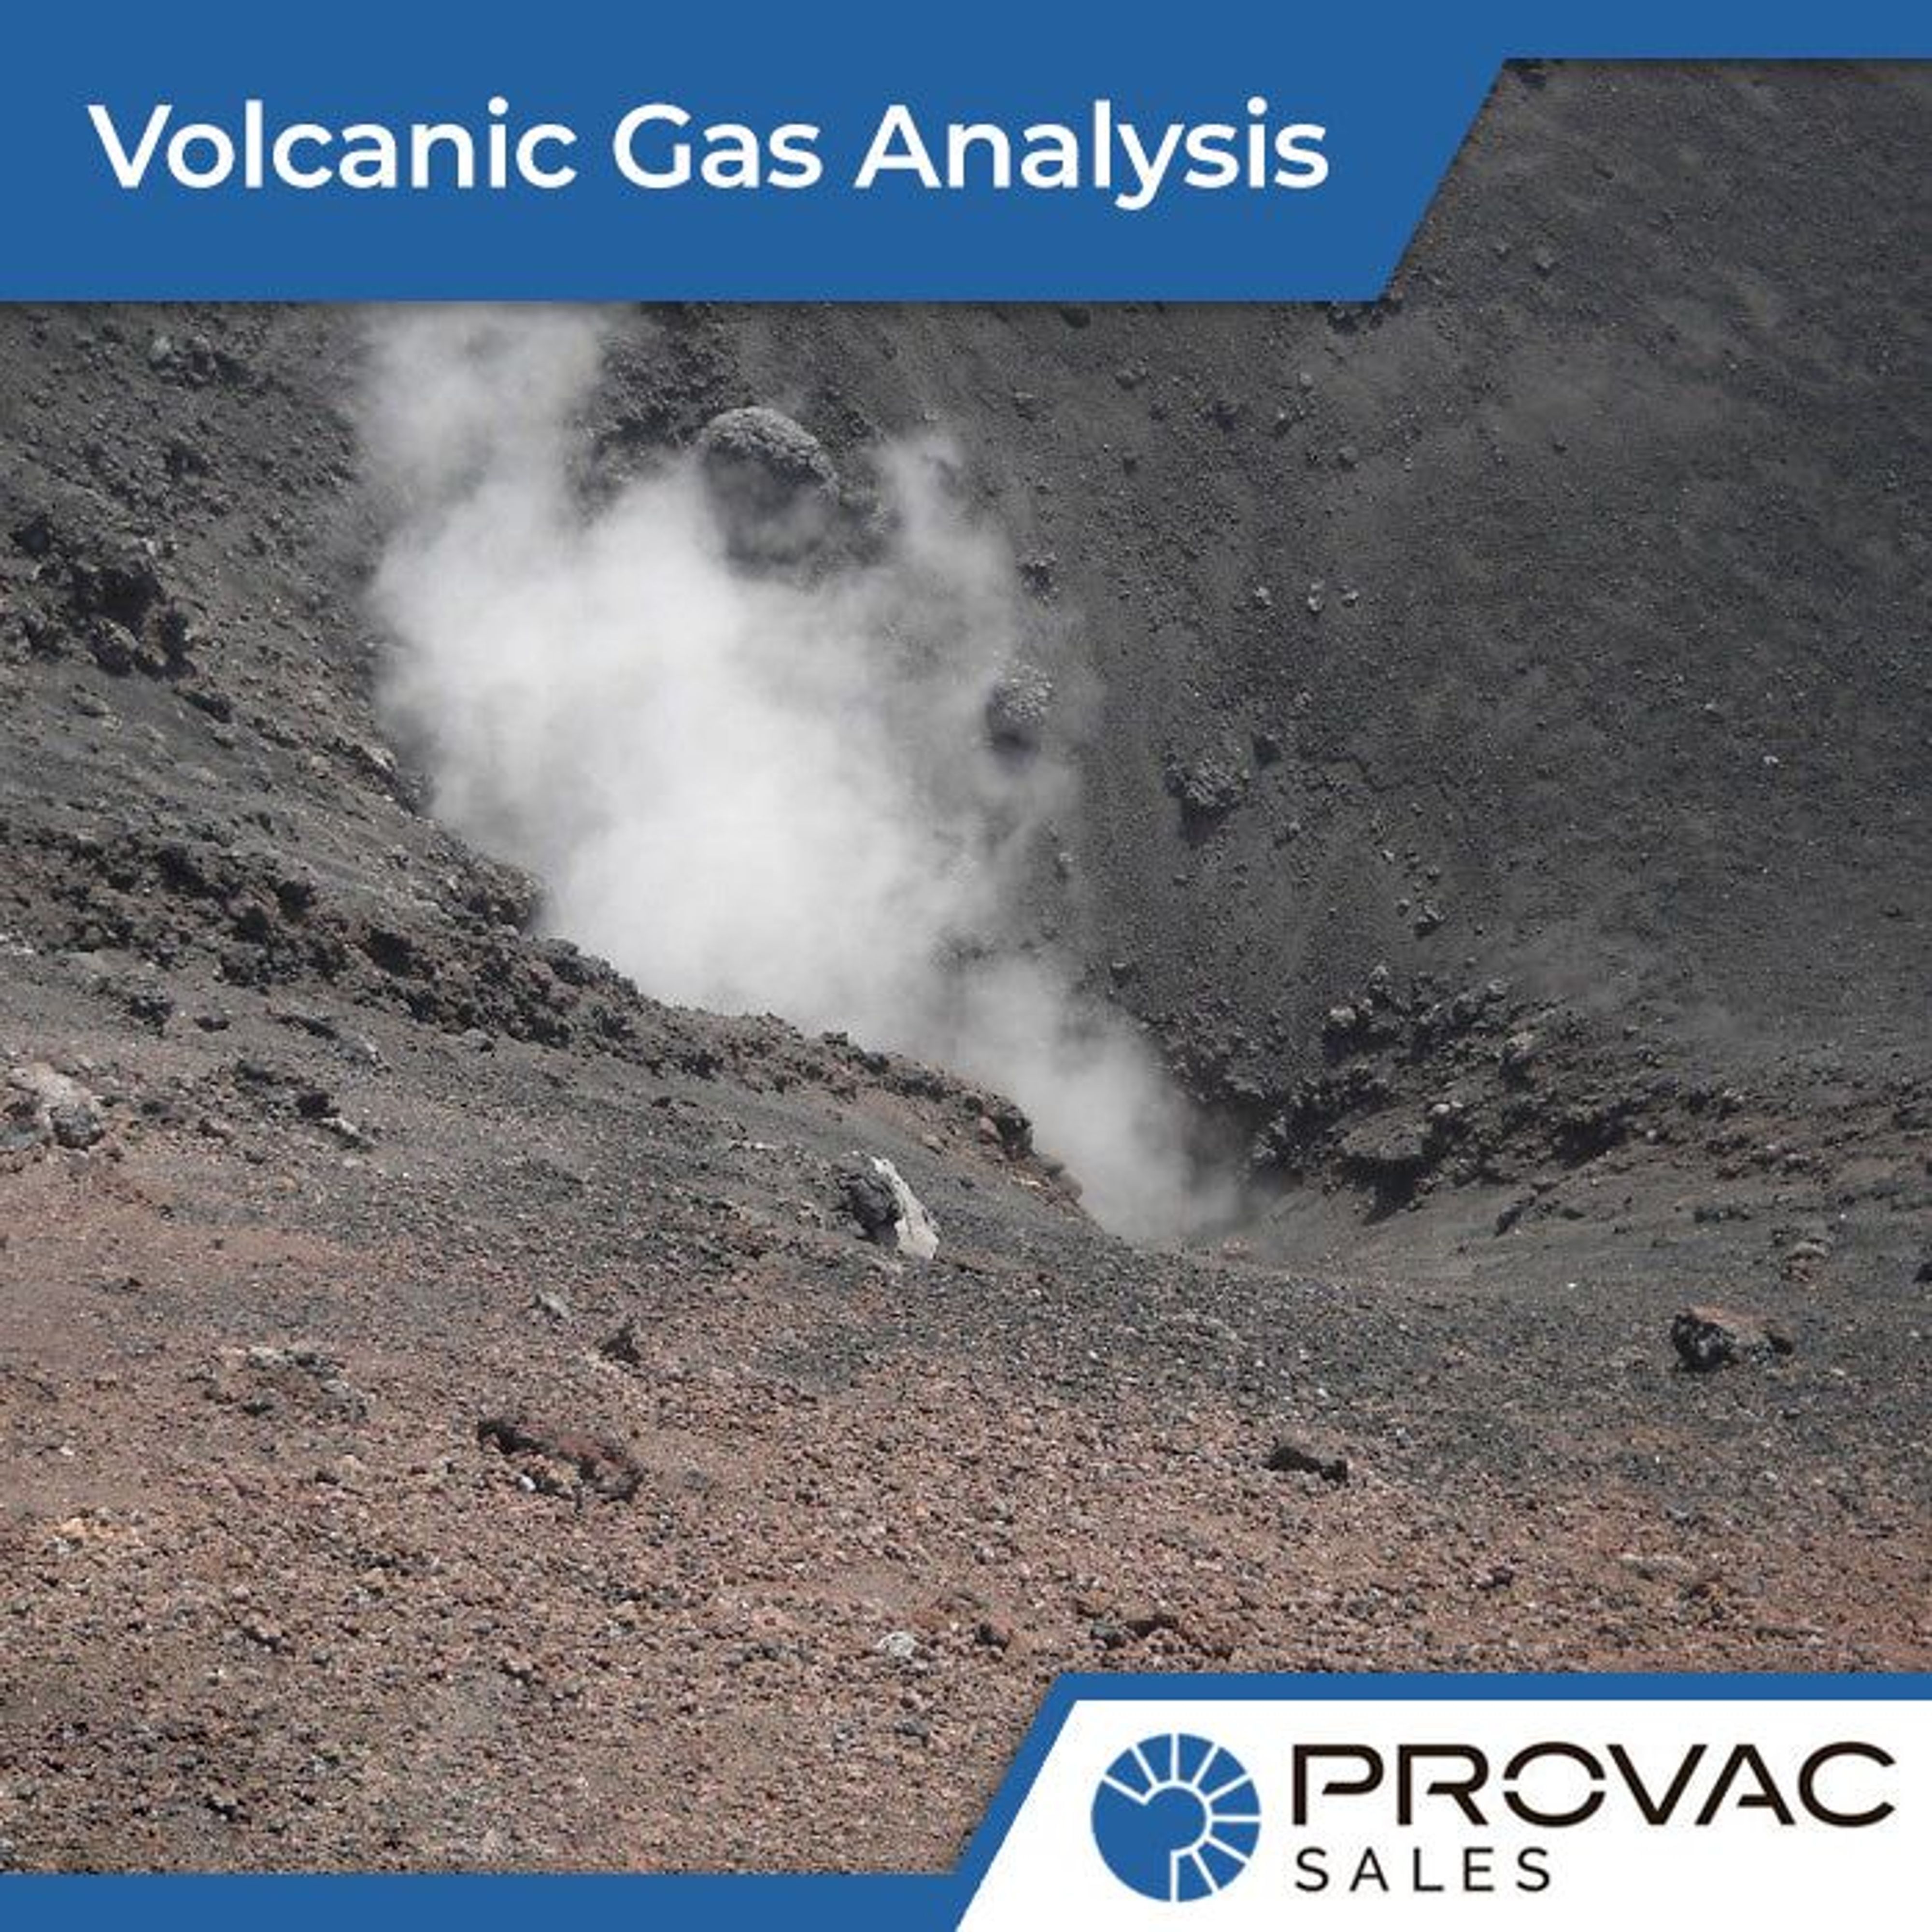 Use of Vacuum Pumps in Volcanic Gas Analysis Background